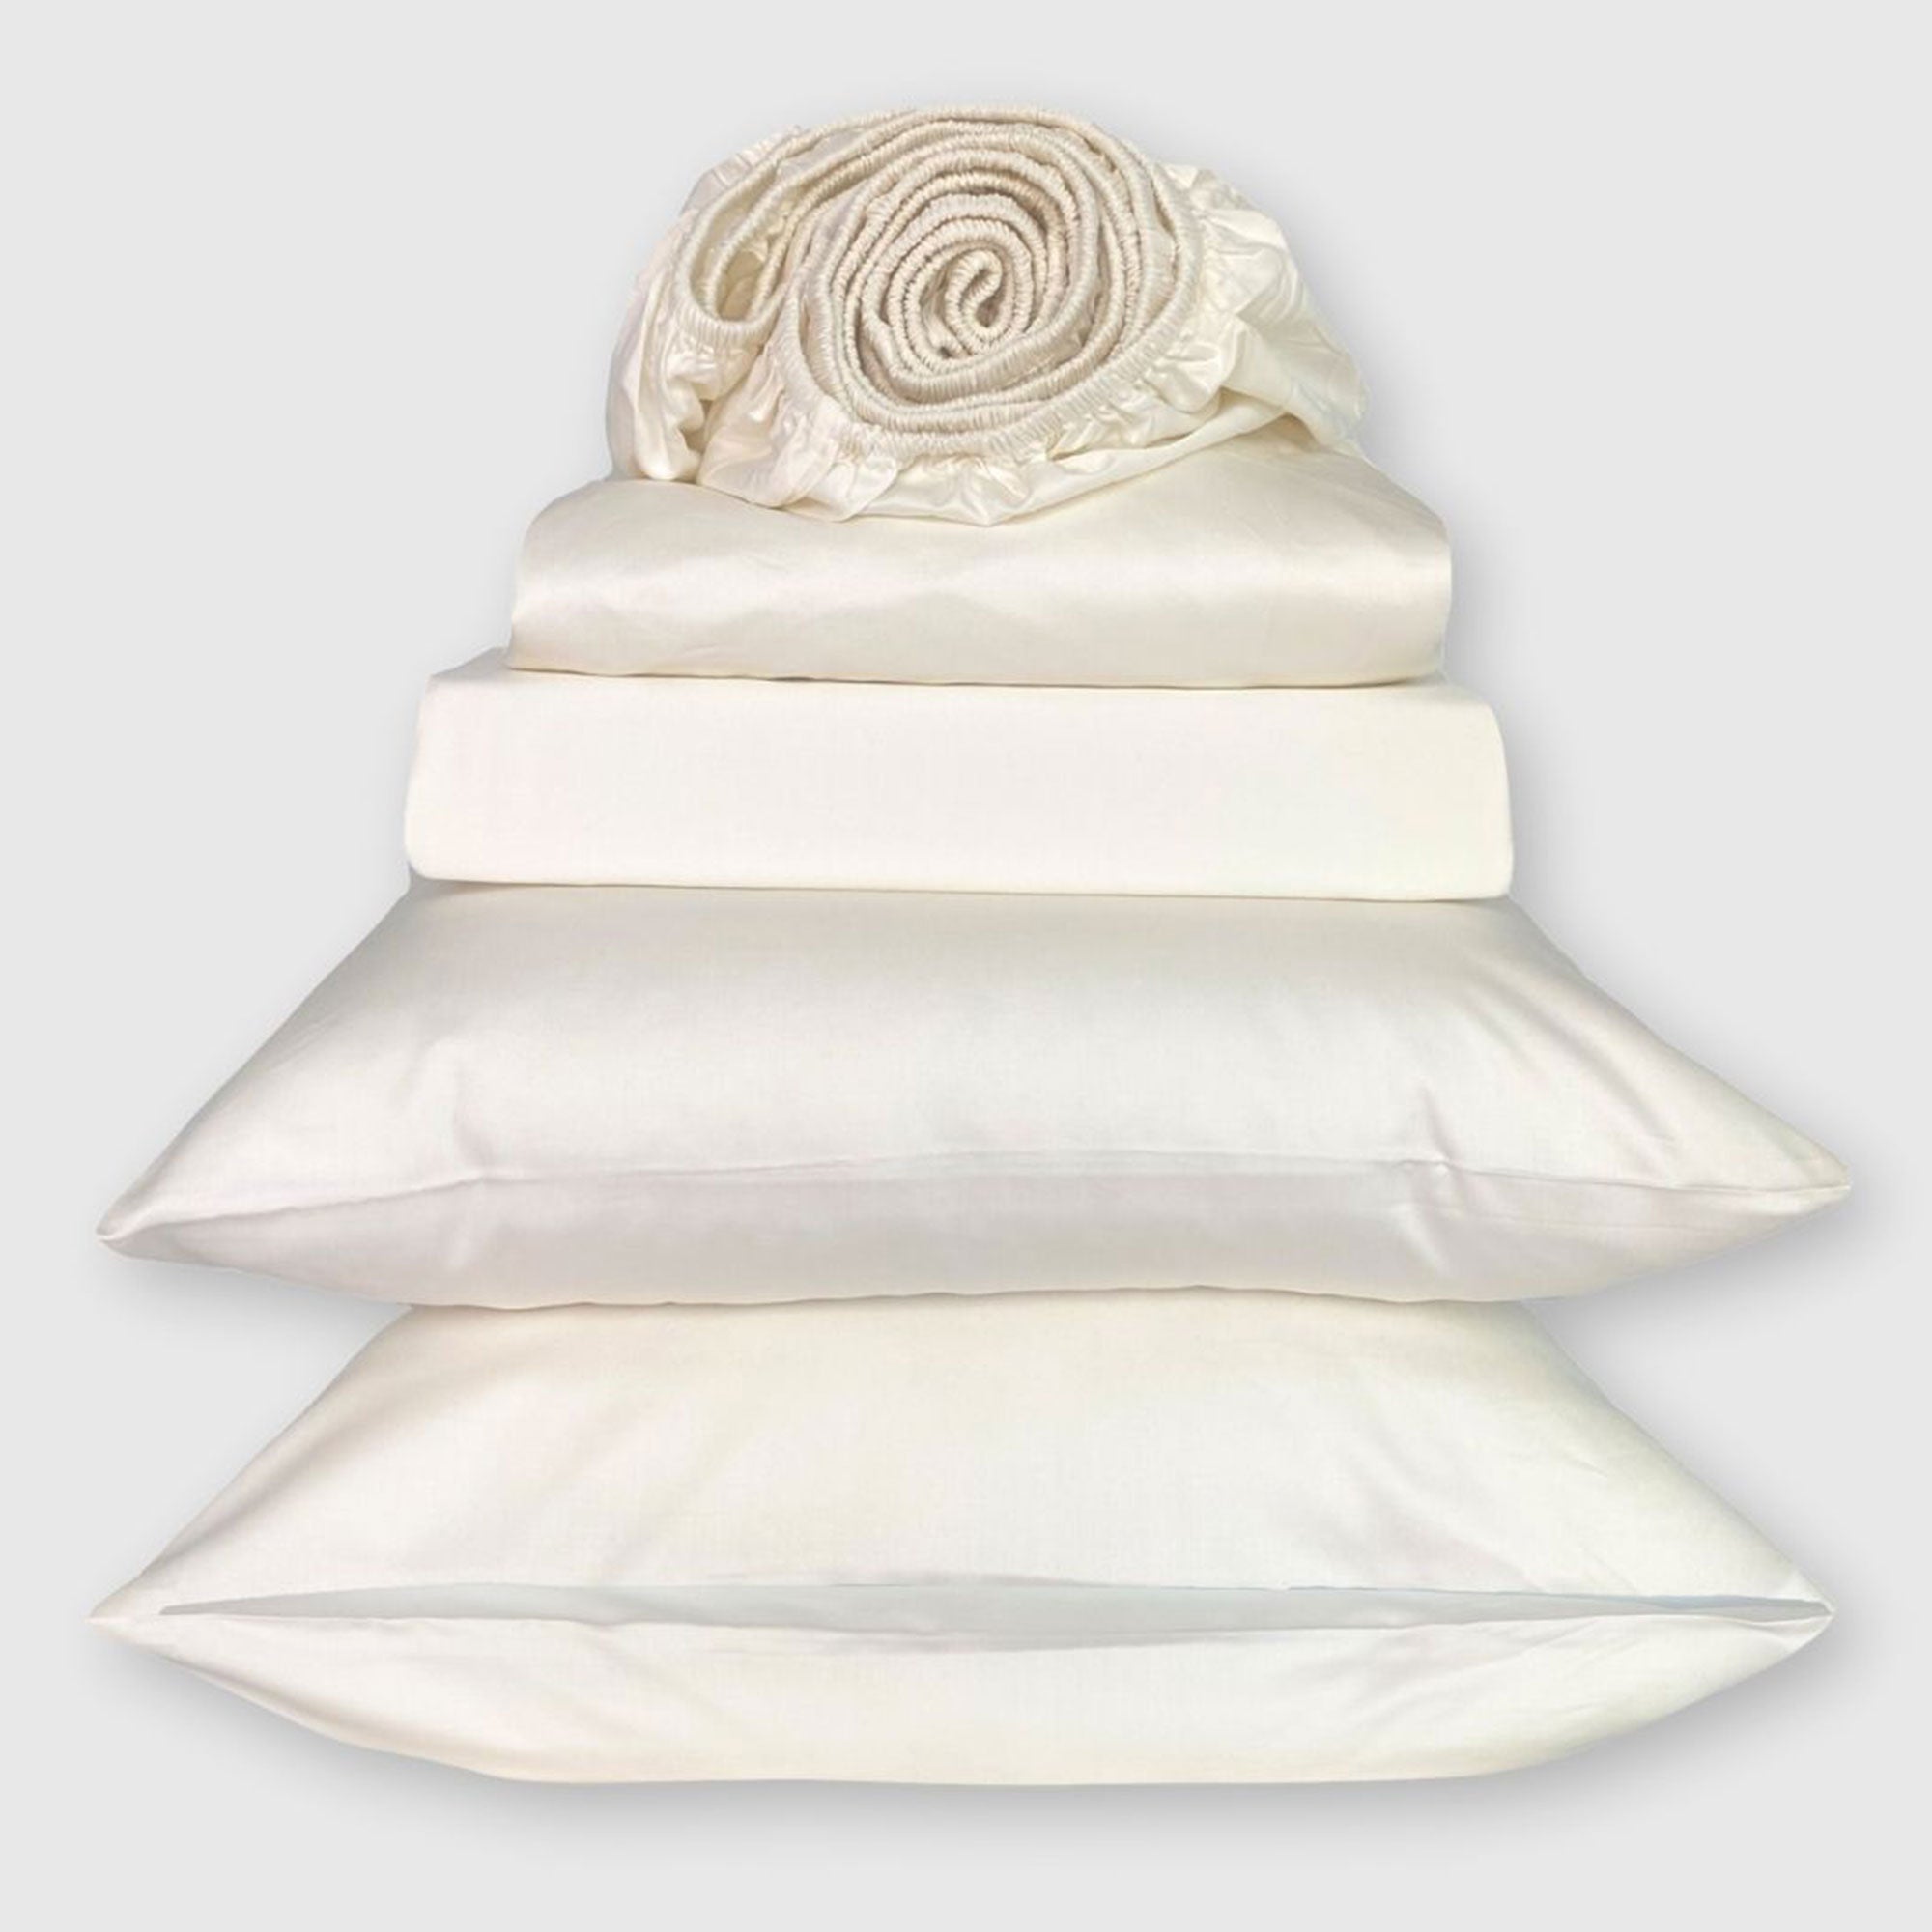 ivory bamboo bed sheet stack with fitted sheet on top rolled into a jelly roll shape